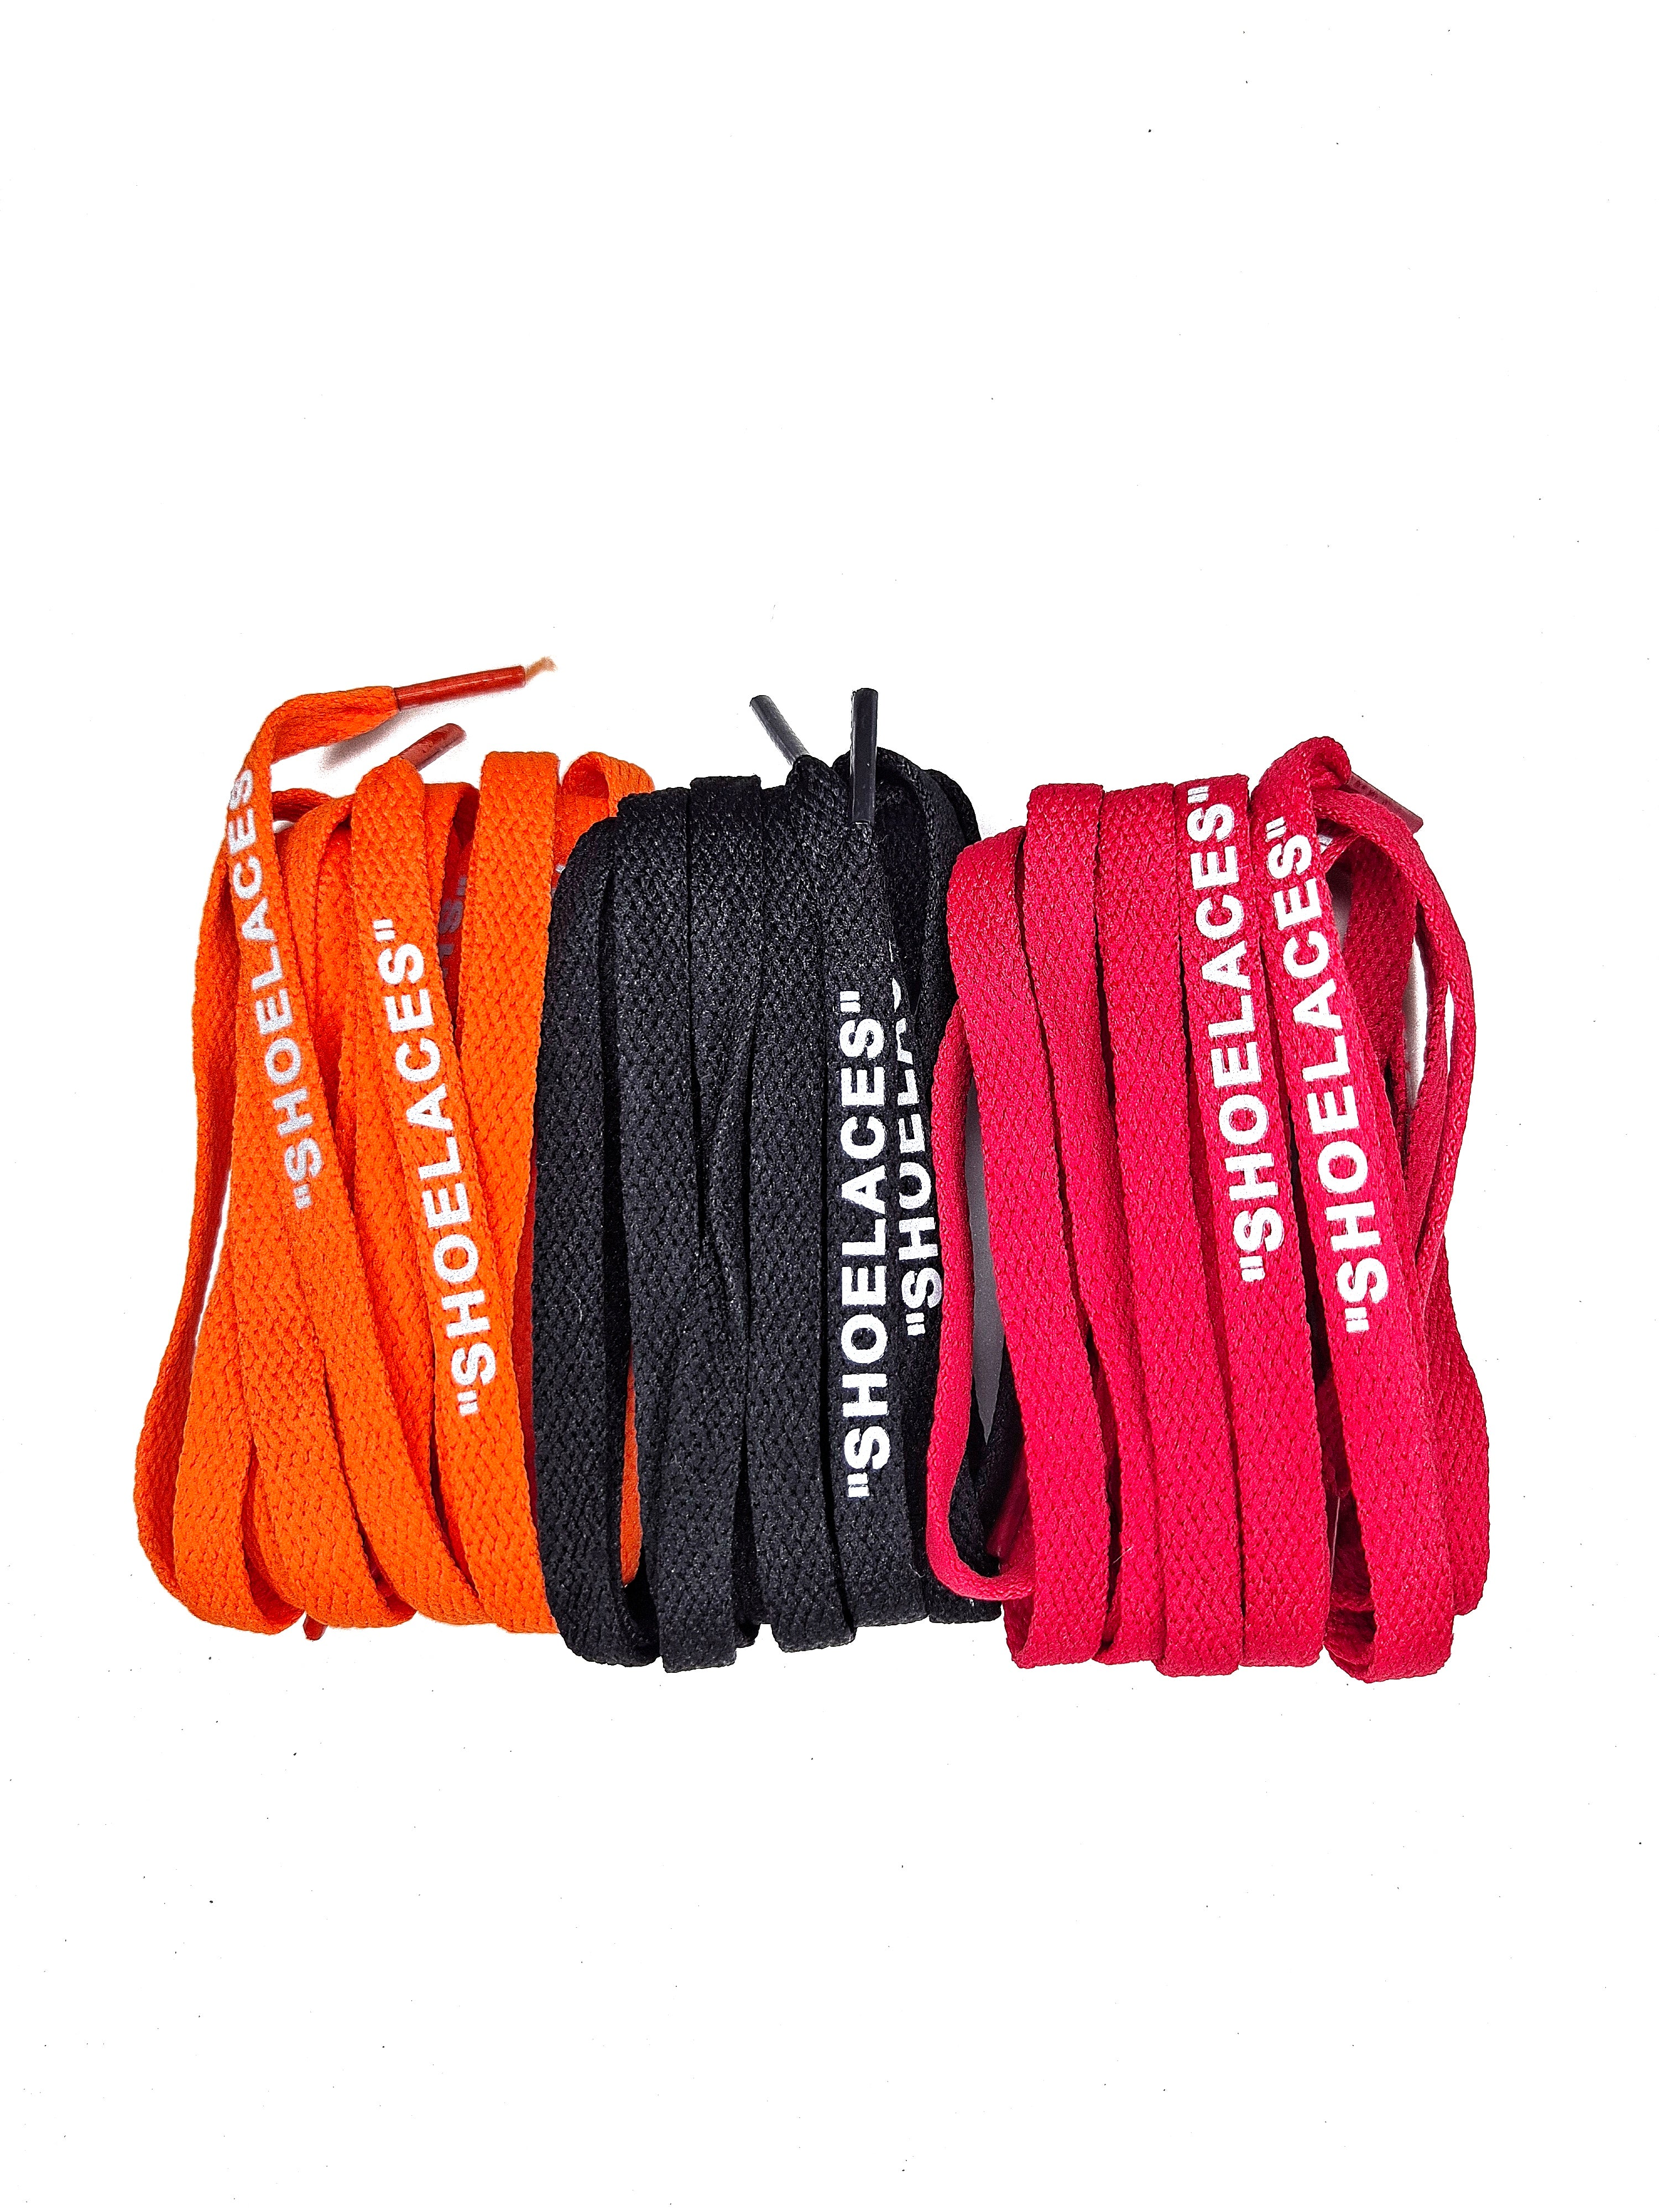 Off-White Style "Shoelace Reflective" Flat lace 3 pairs combo by TGLC